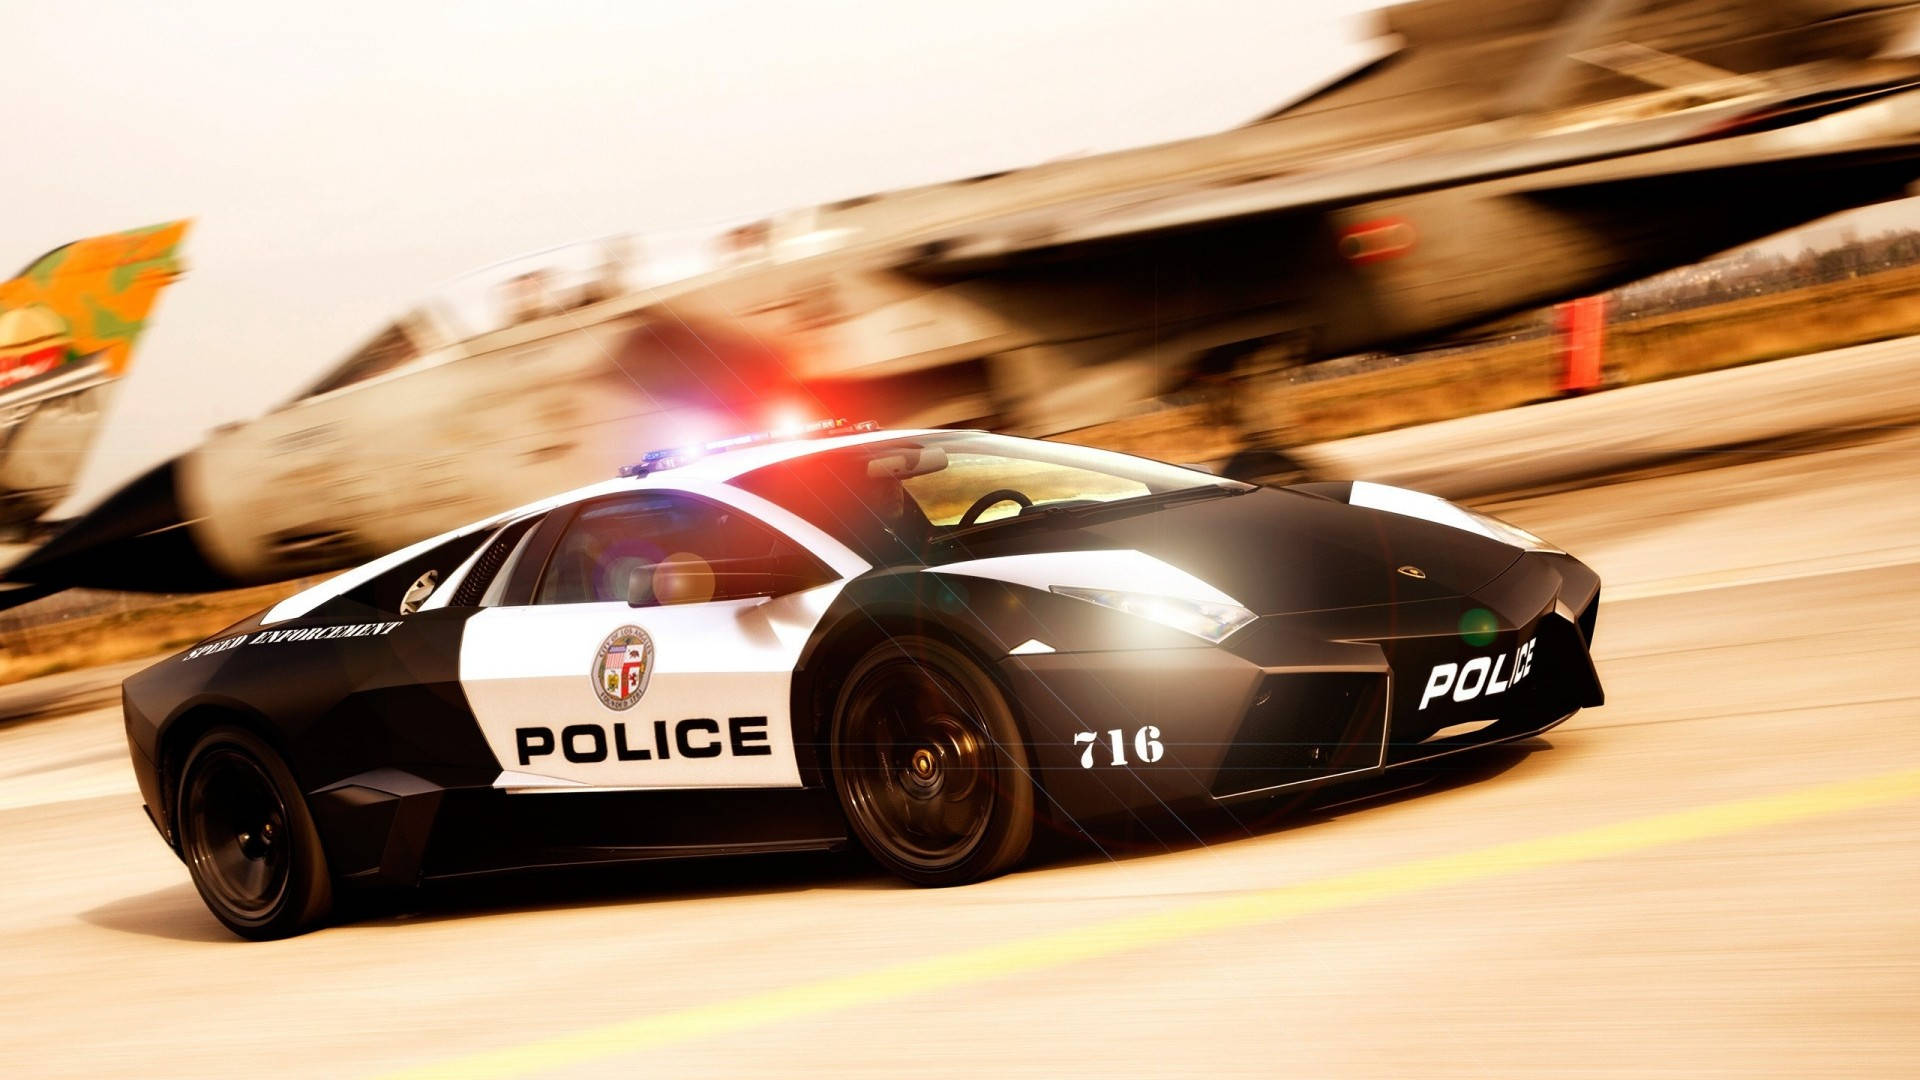 Need For Speed Koenigsegg Agera Police Car Wallpaper